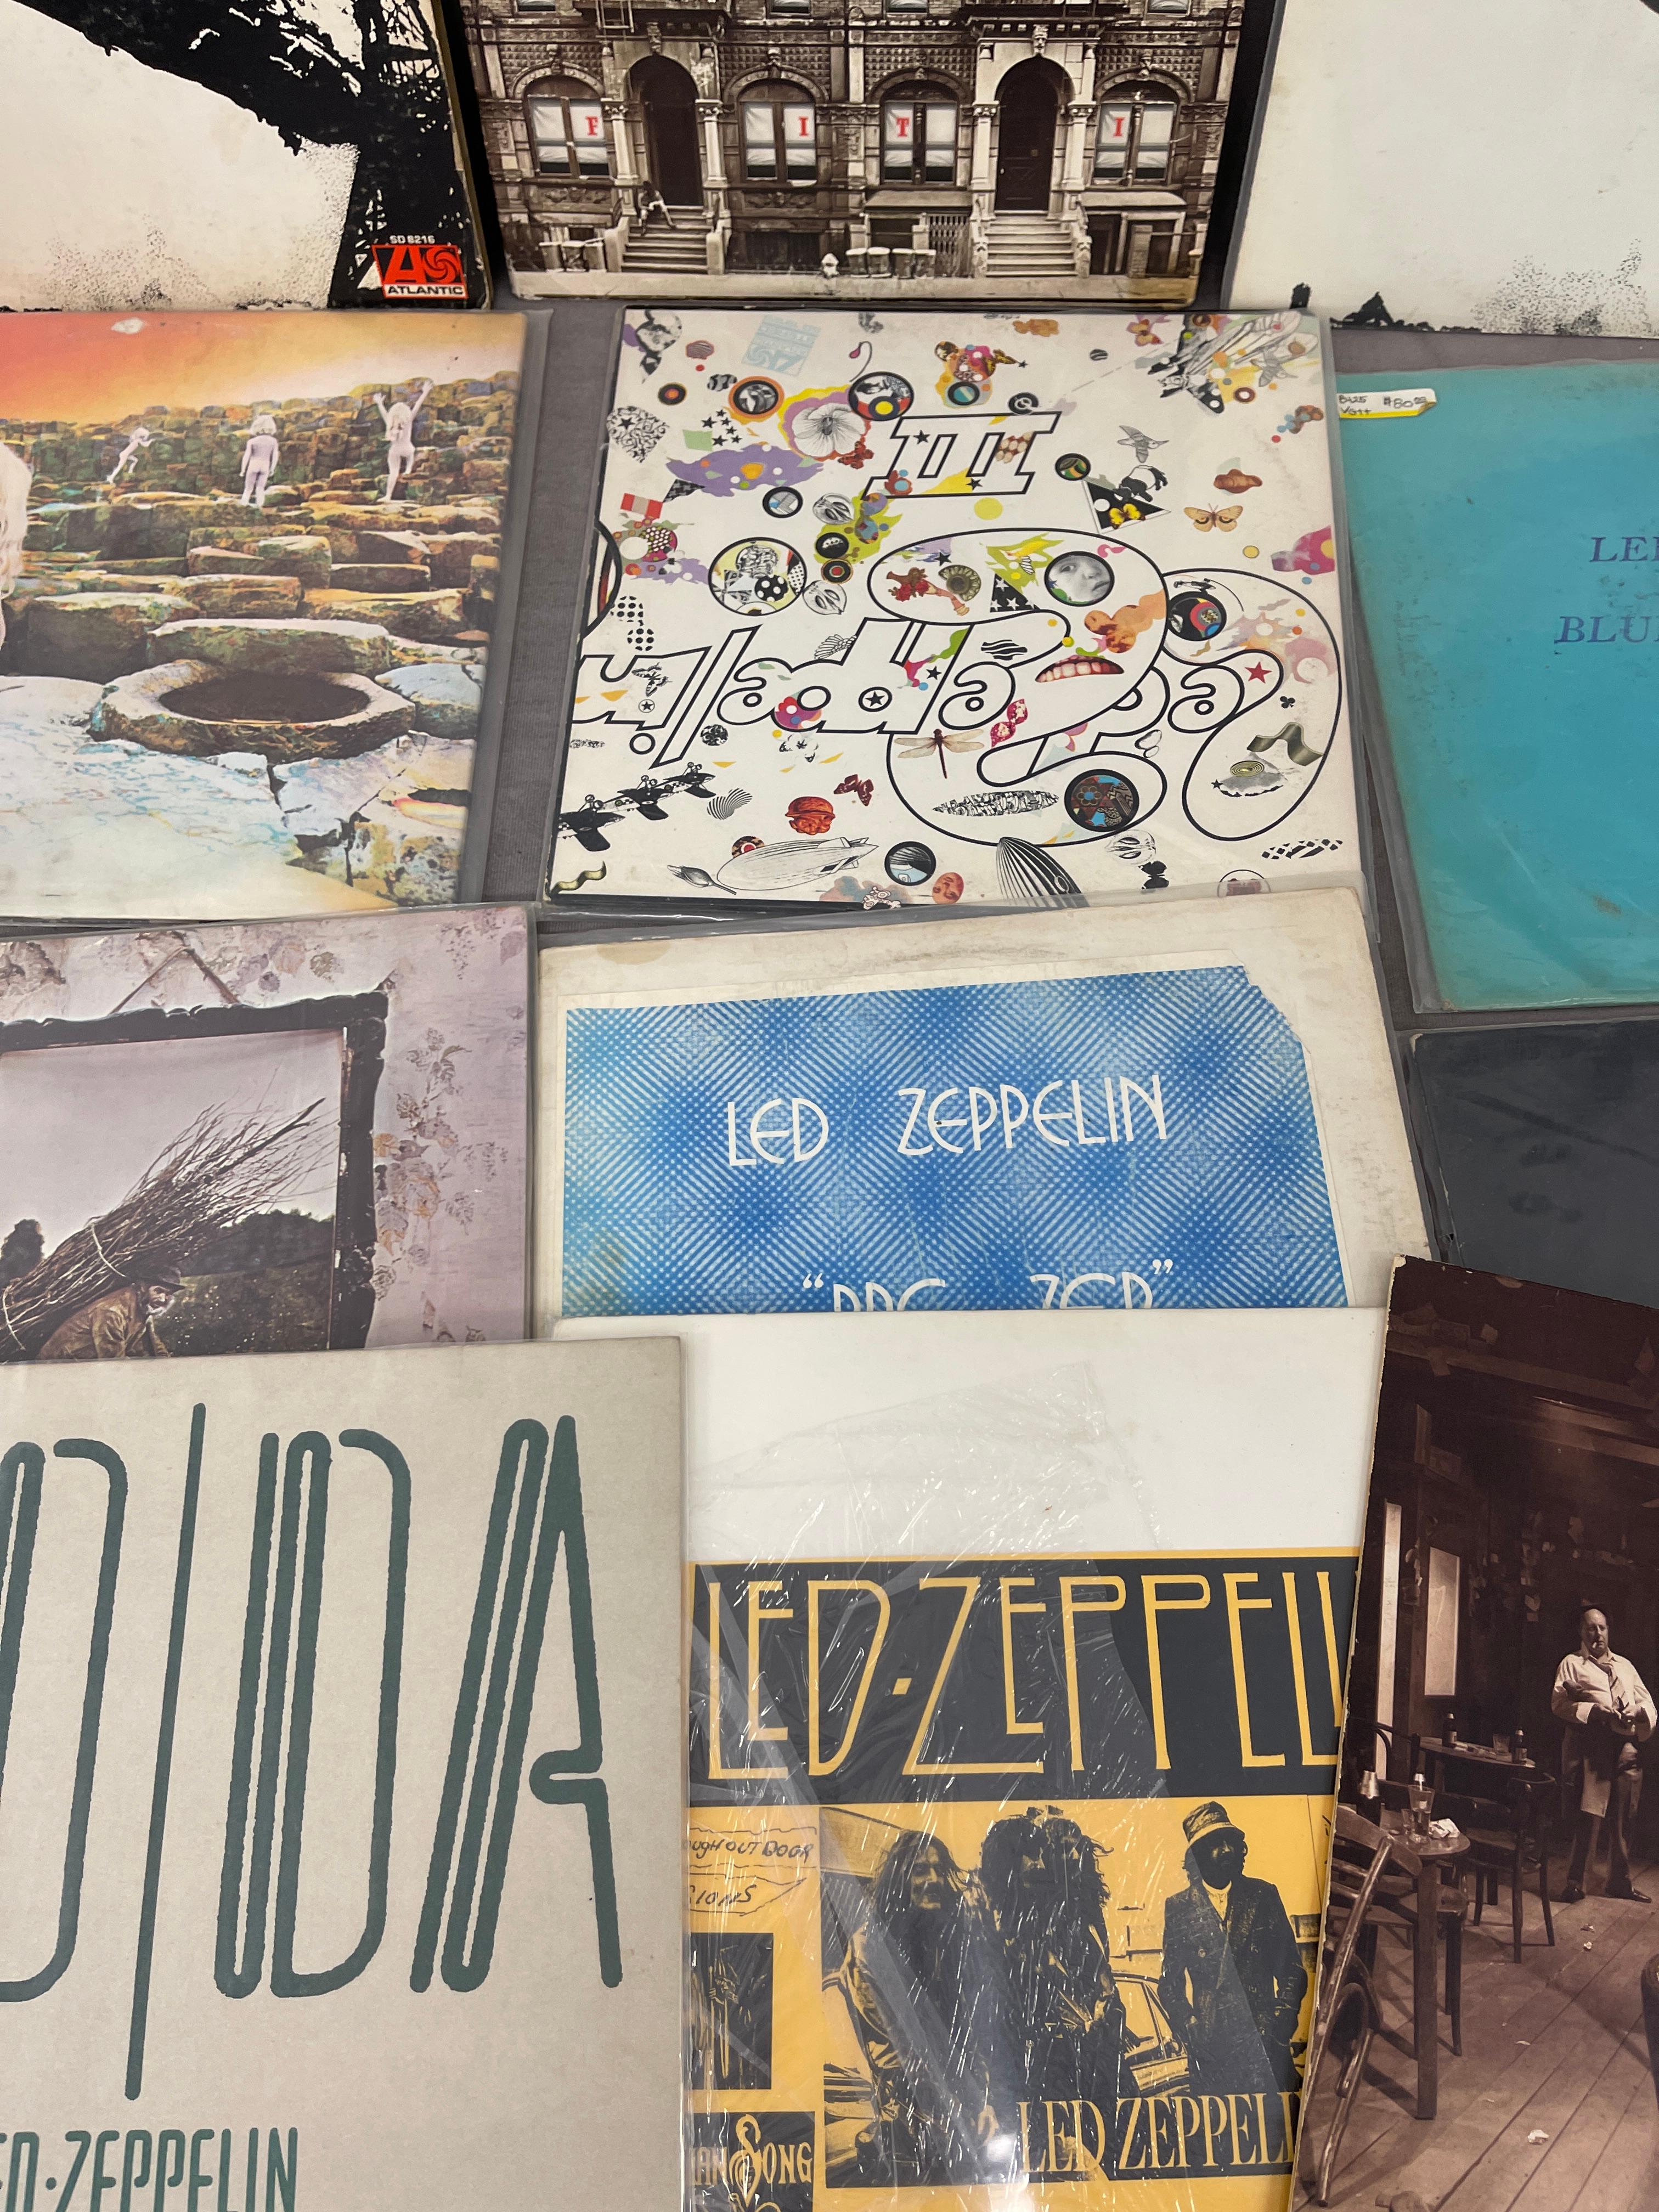 Vintage RARE Led Zeppelin First Pressing Vinyl Record Collection Lot